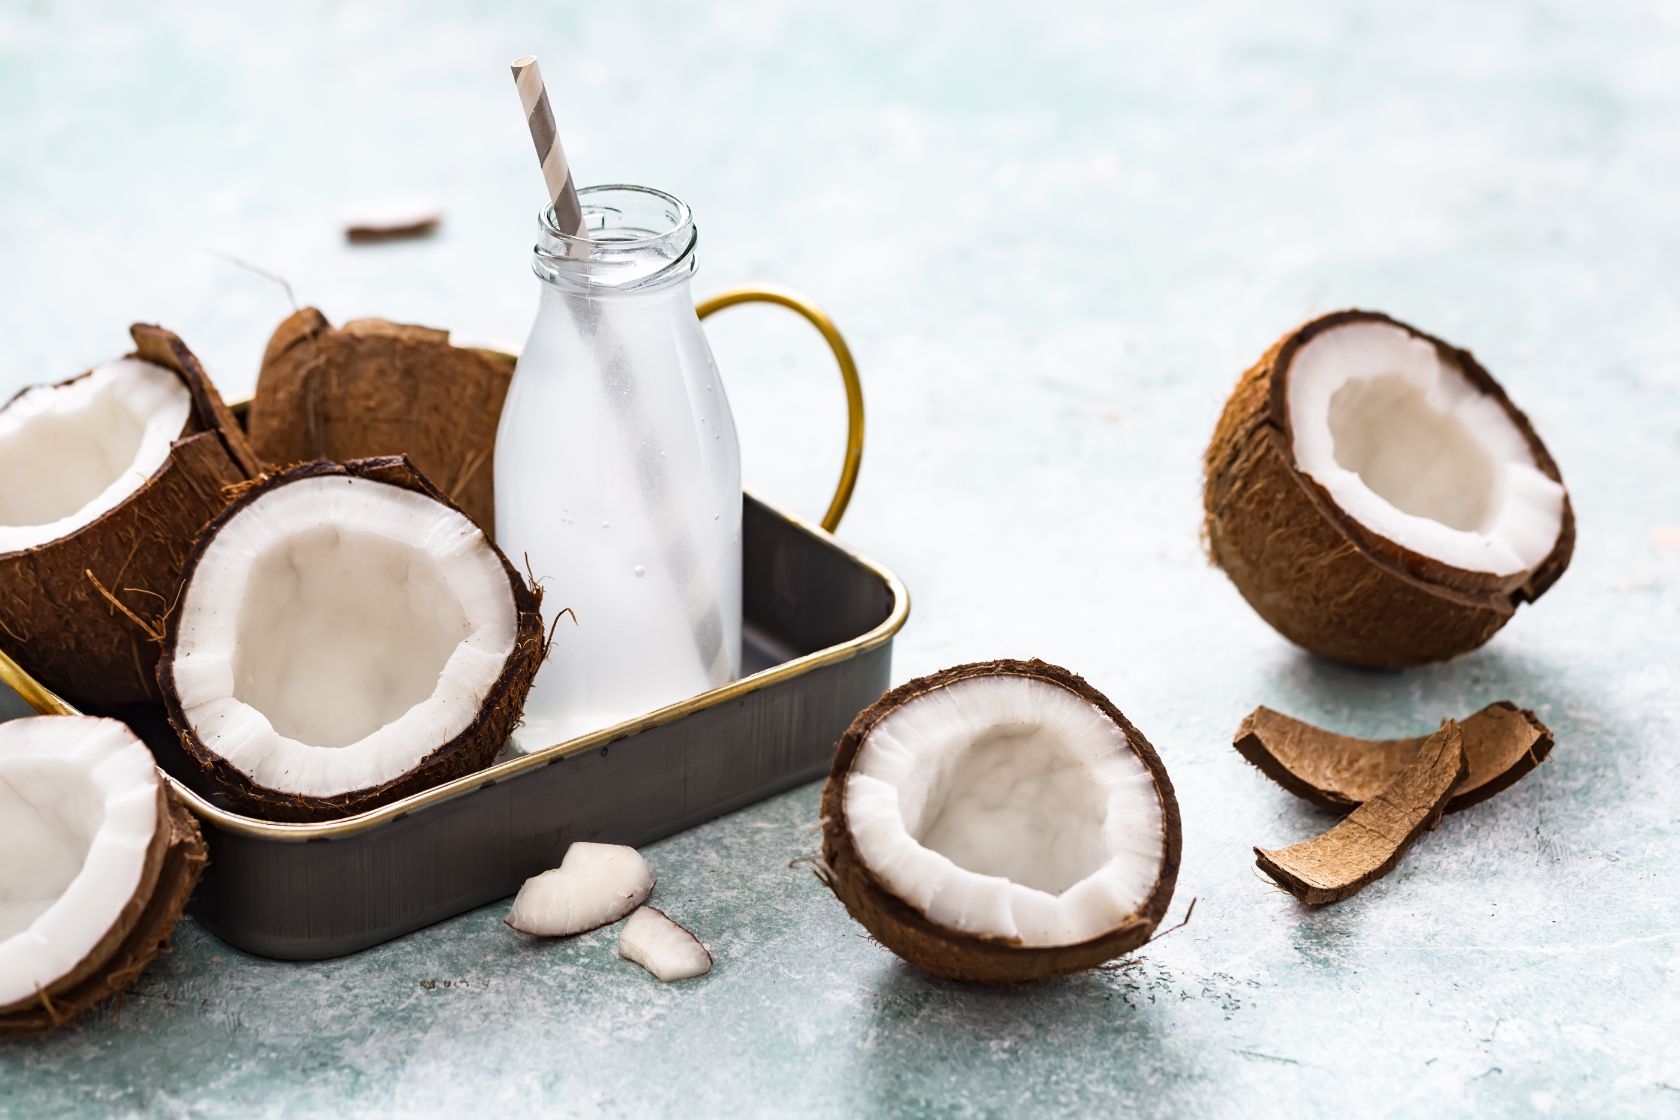 Coconuts and coconut water sitting on a tray.